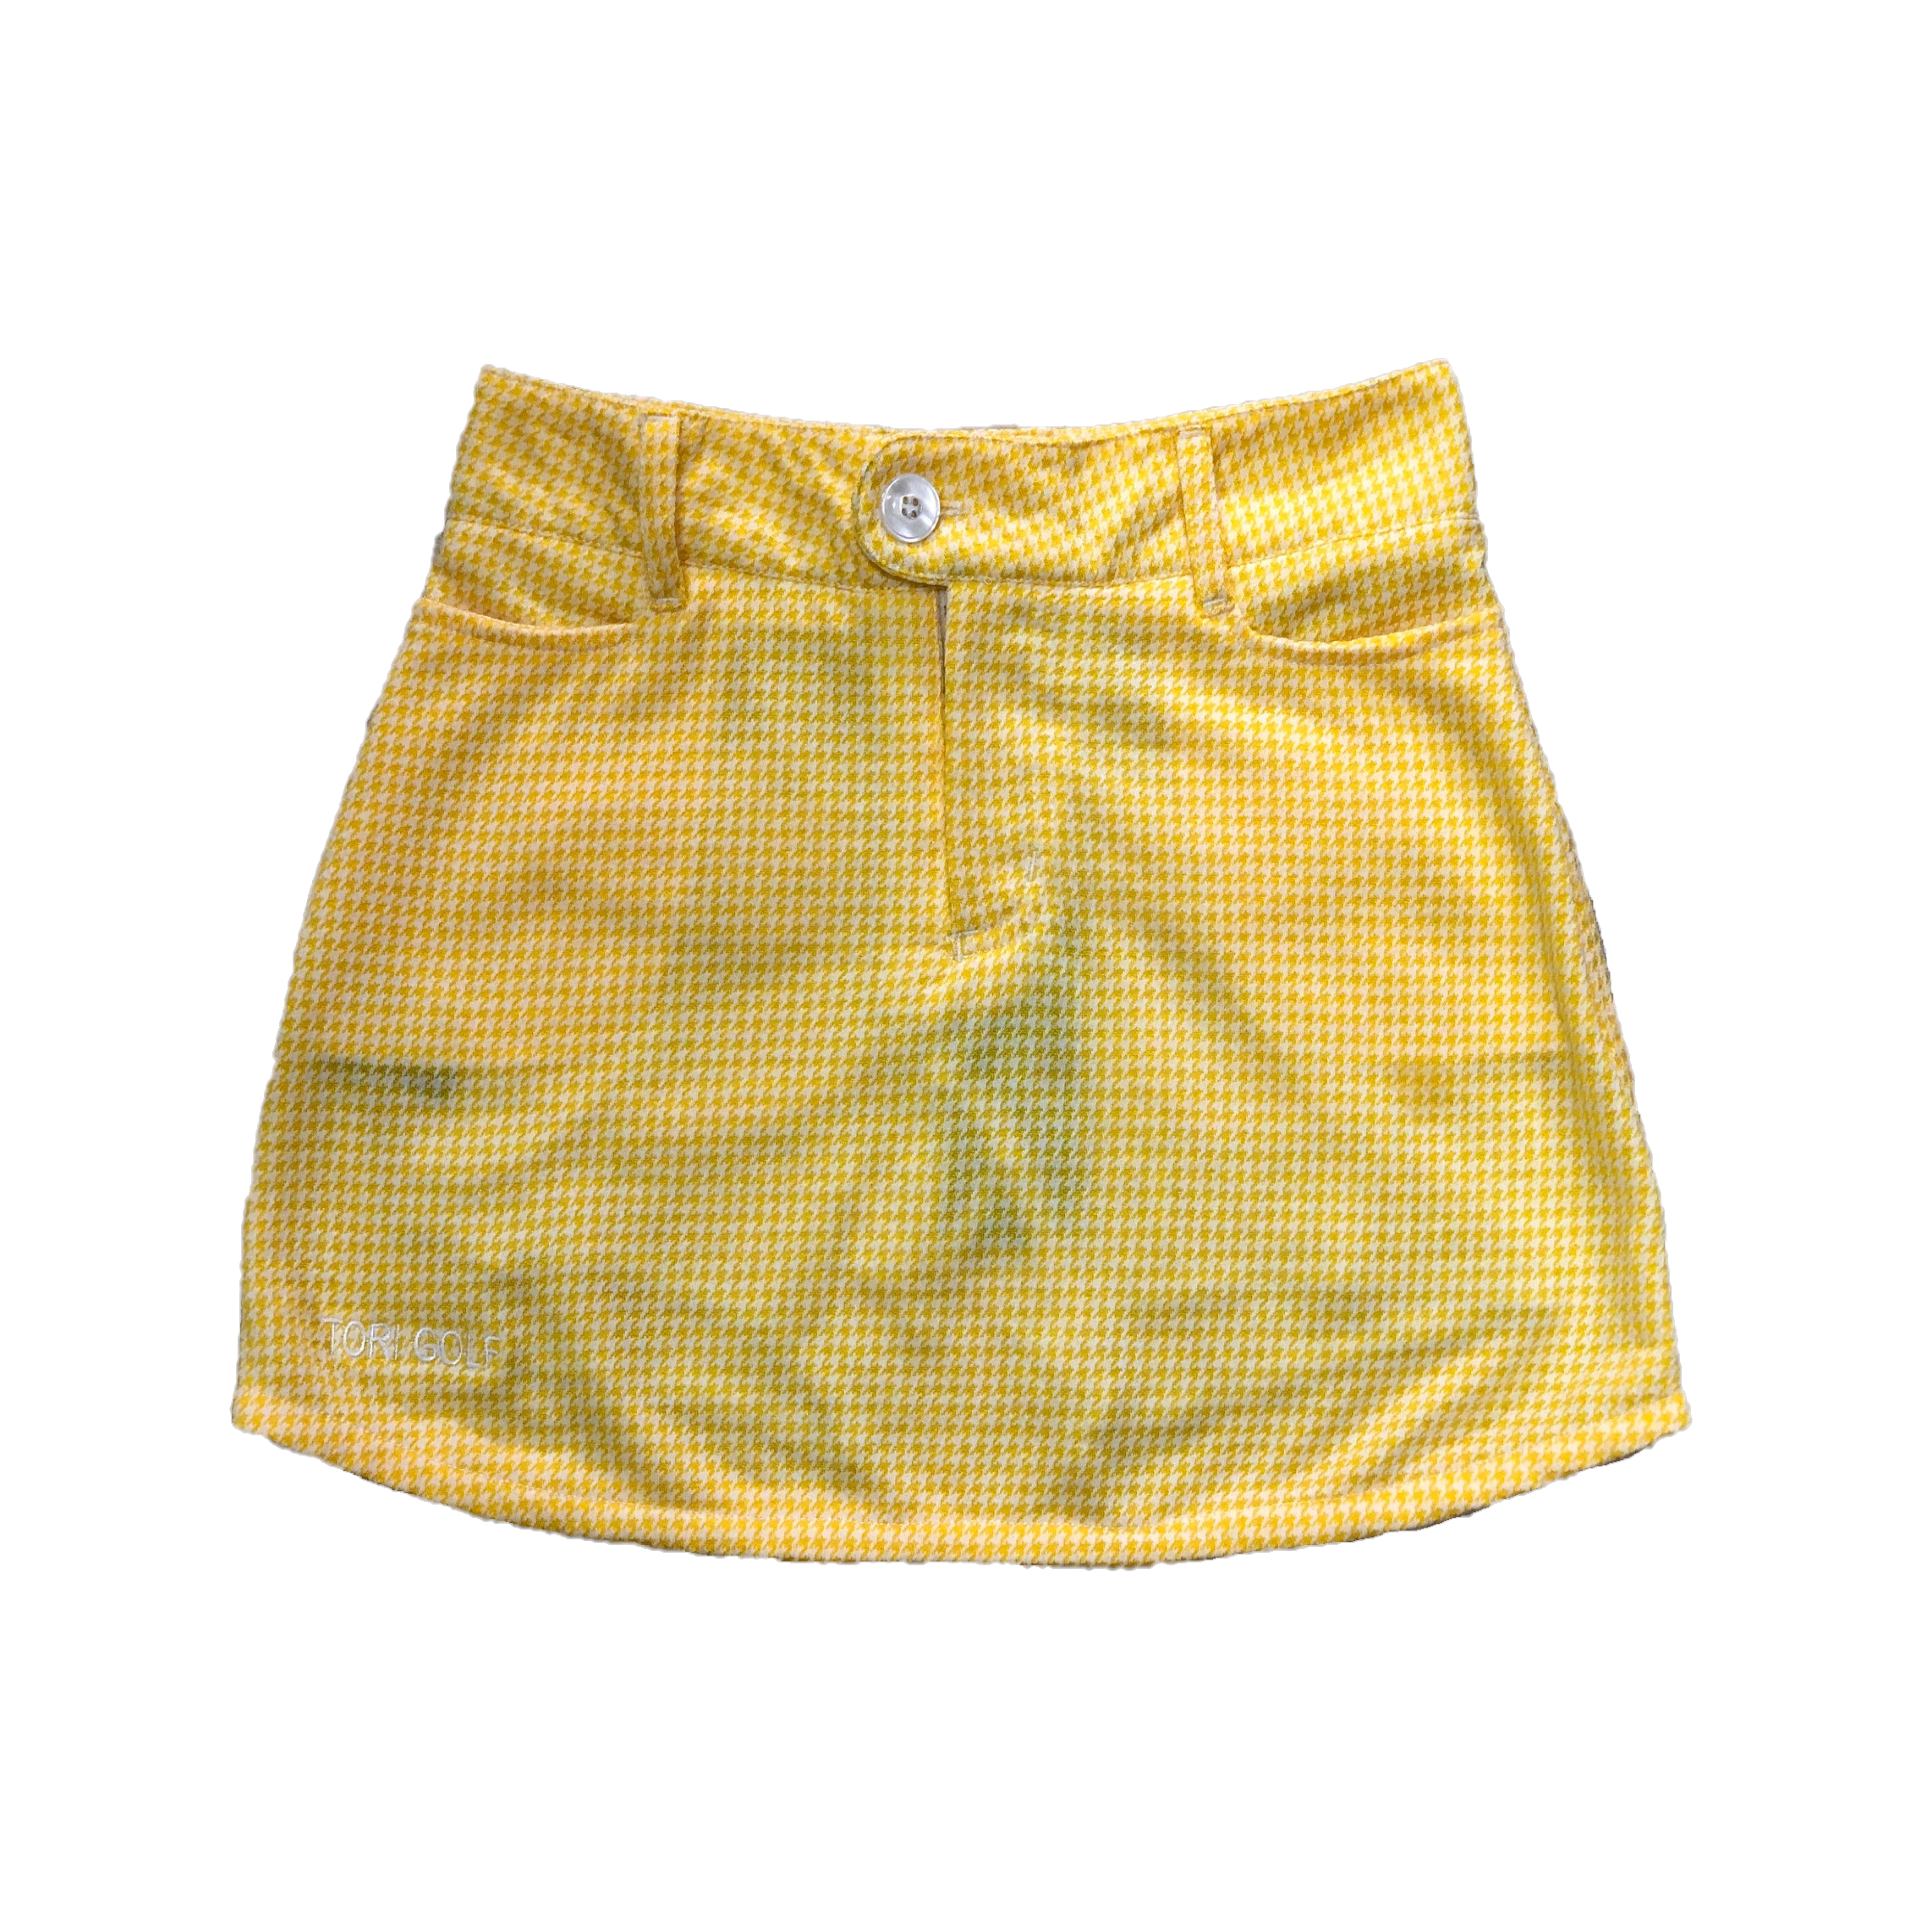 LS-067 || Ladies Skirt Yellow Emmbossed White Texture 2 Rear and 2 Front Pocket